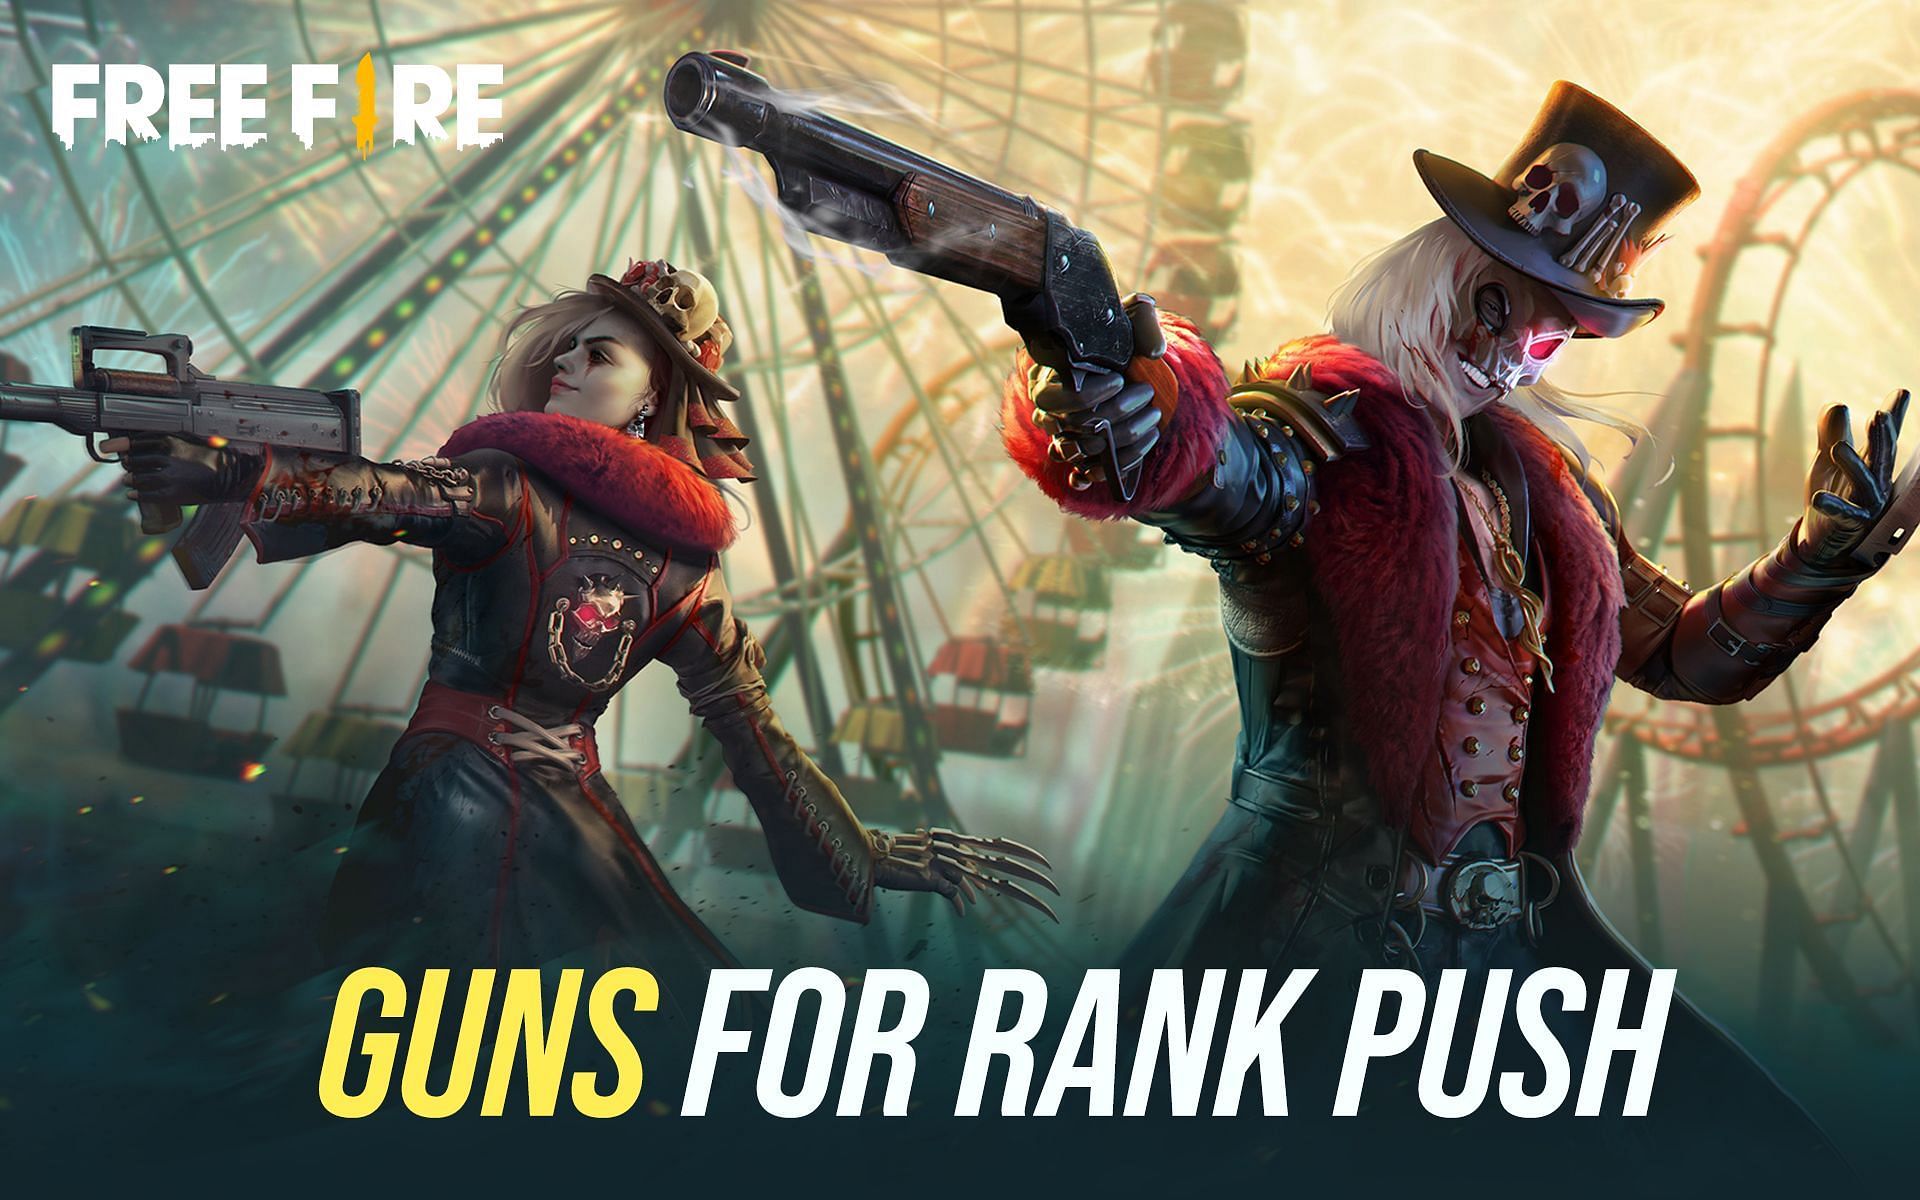 Free Fire guns are a massive part of the gameplay (Image via Sportskeeda)